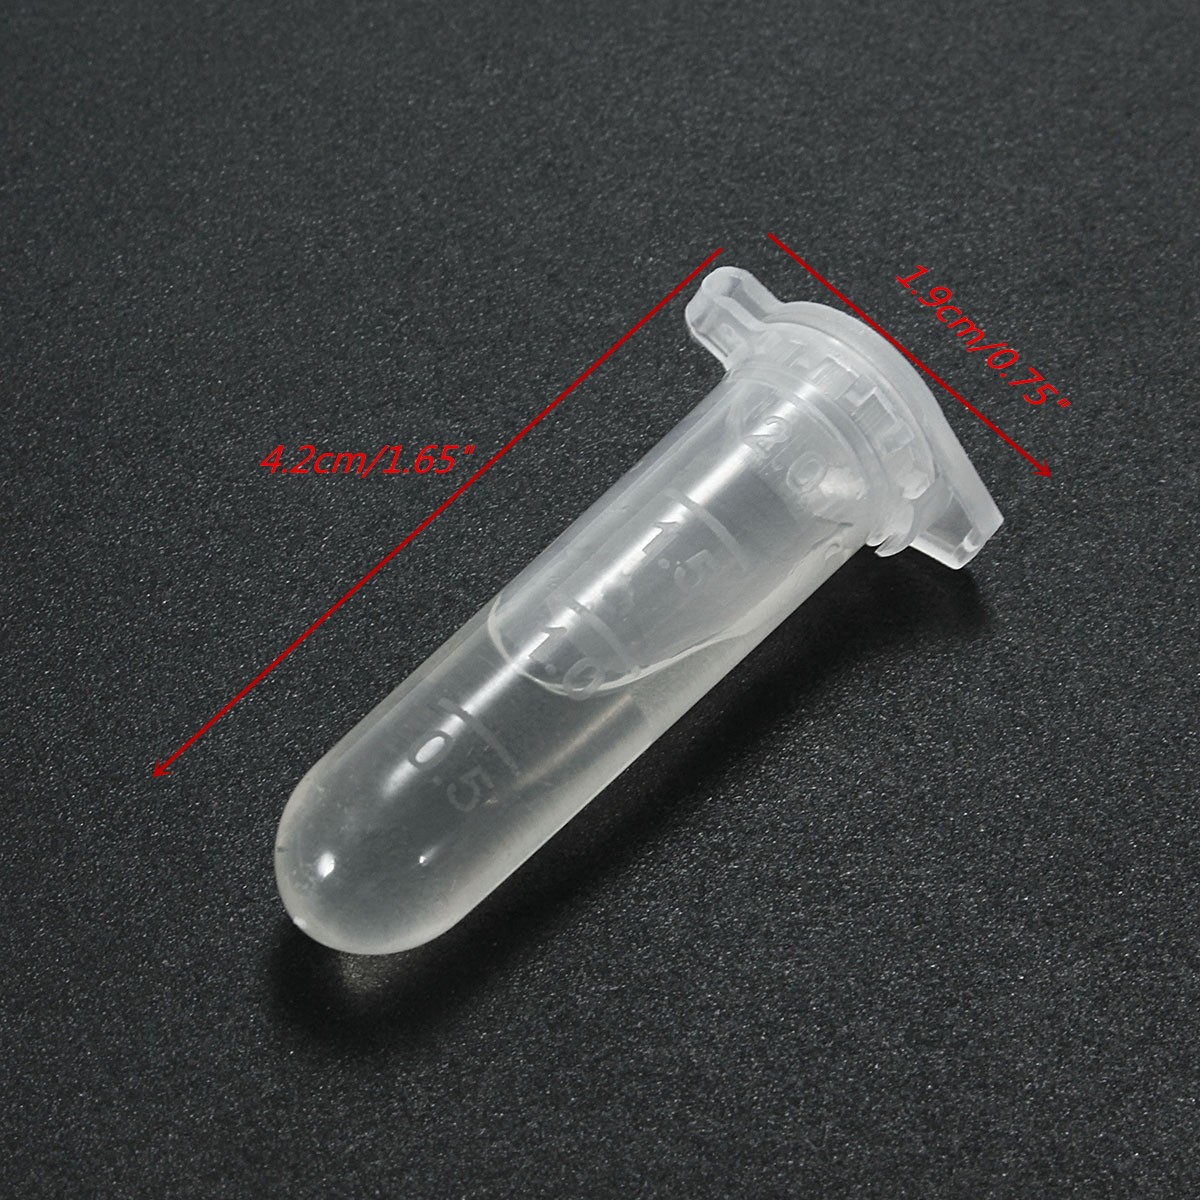 2ml-Test-Tube-Centrifuge-Vial-Clear-Plastic-with-Snap-Cap-for-Lab-Laboratory-1156457-2